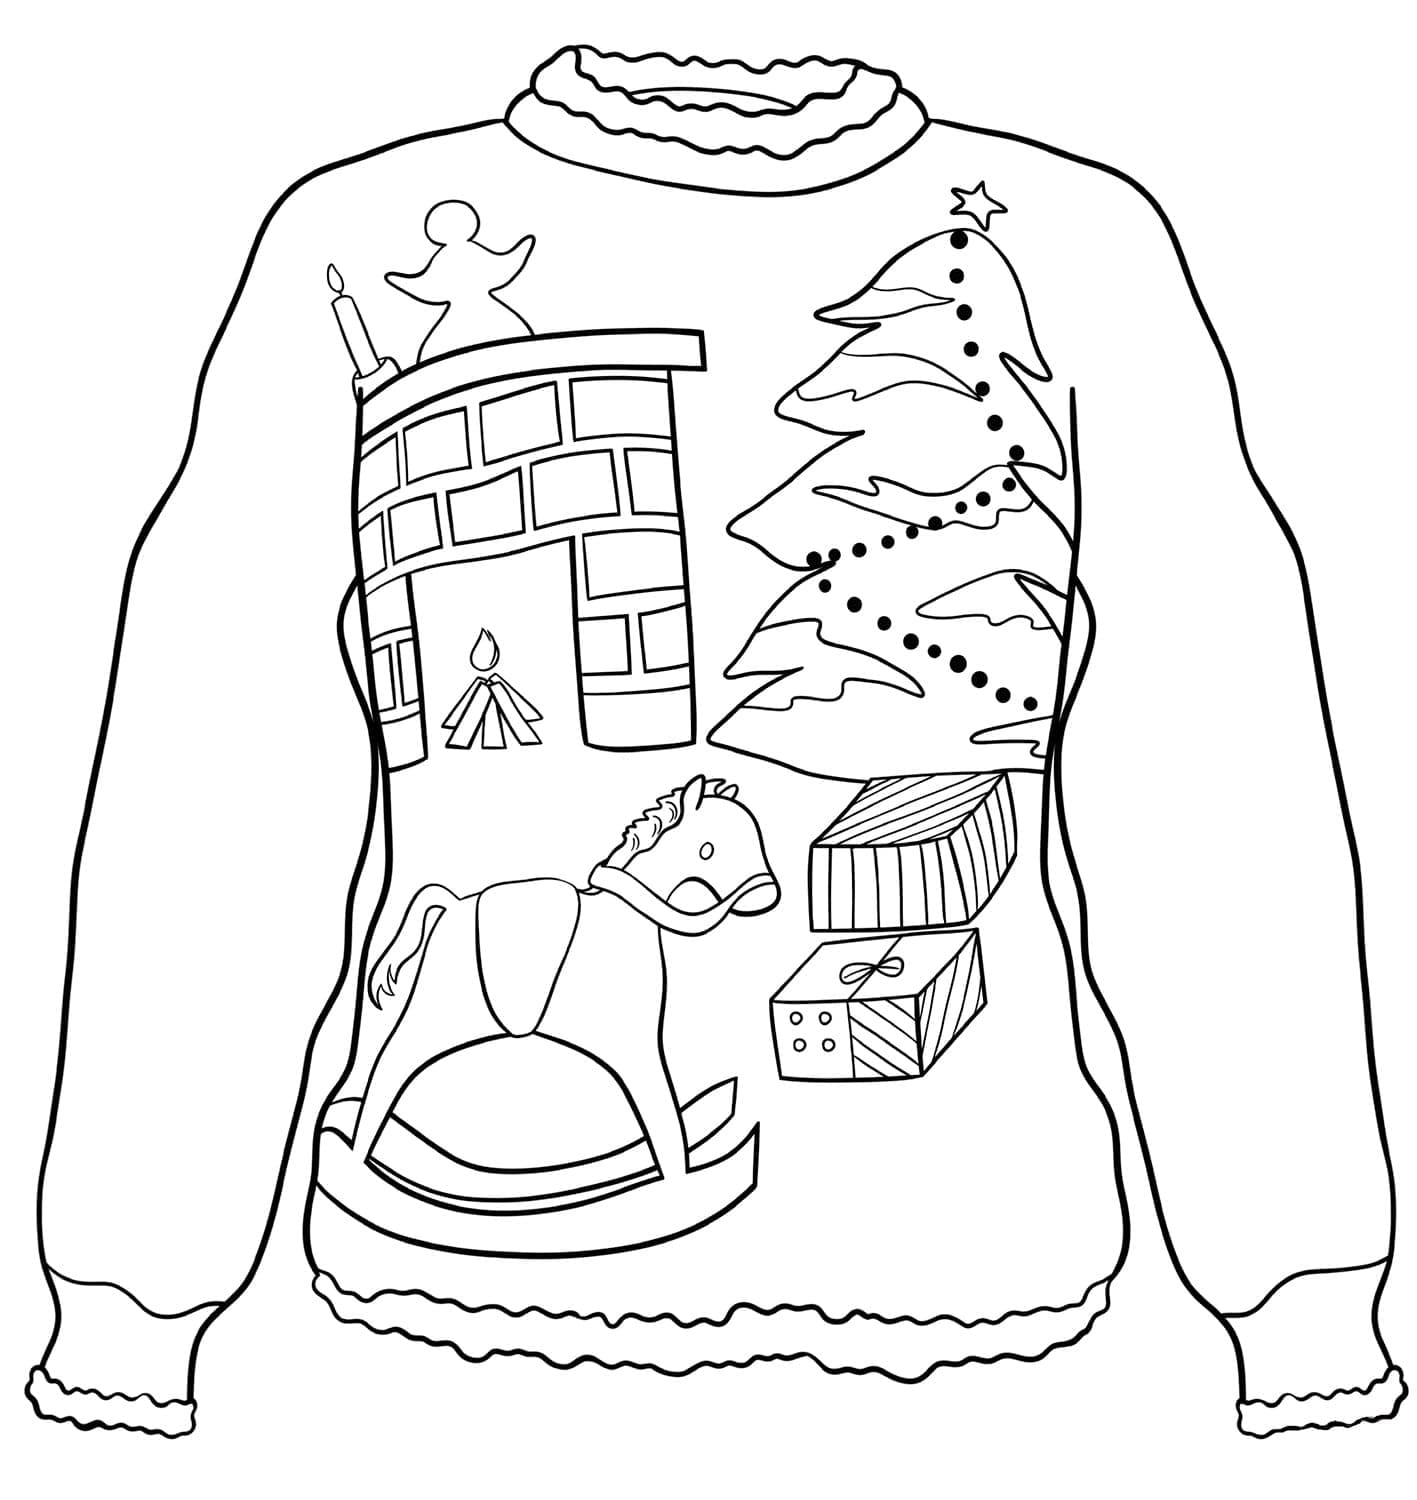 Sweater for Christmas coloring page - Download, Print or Color Online ...